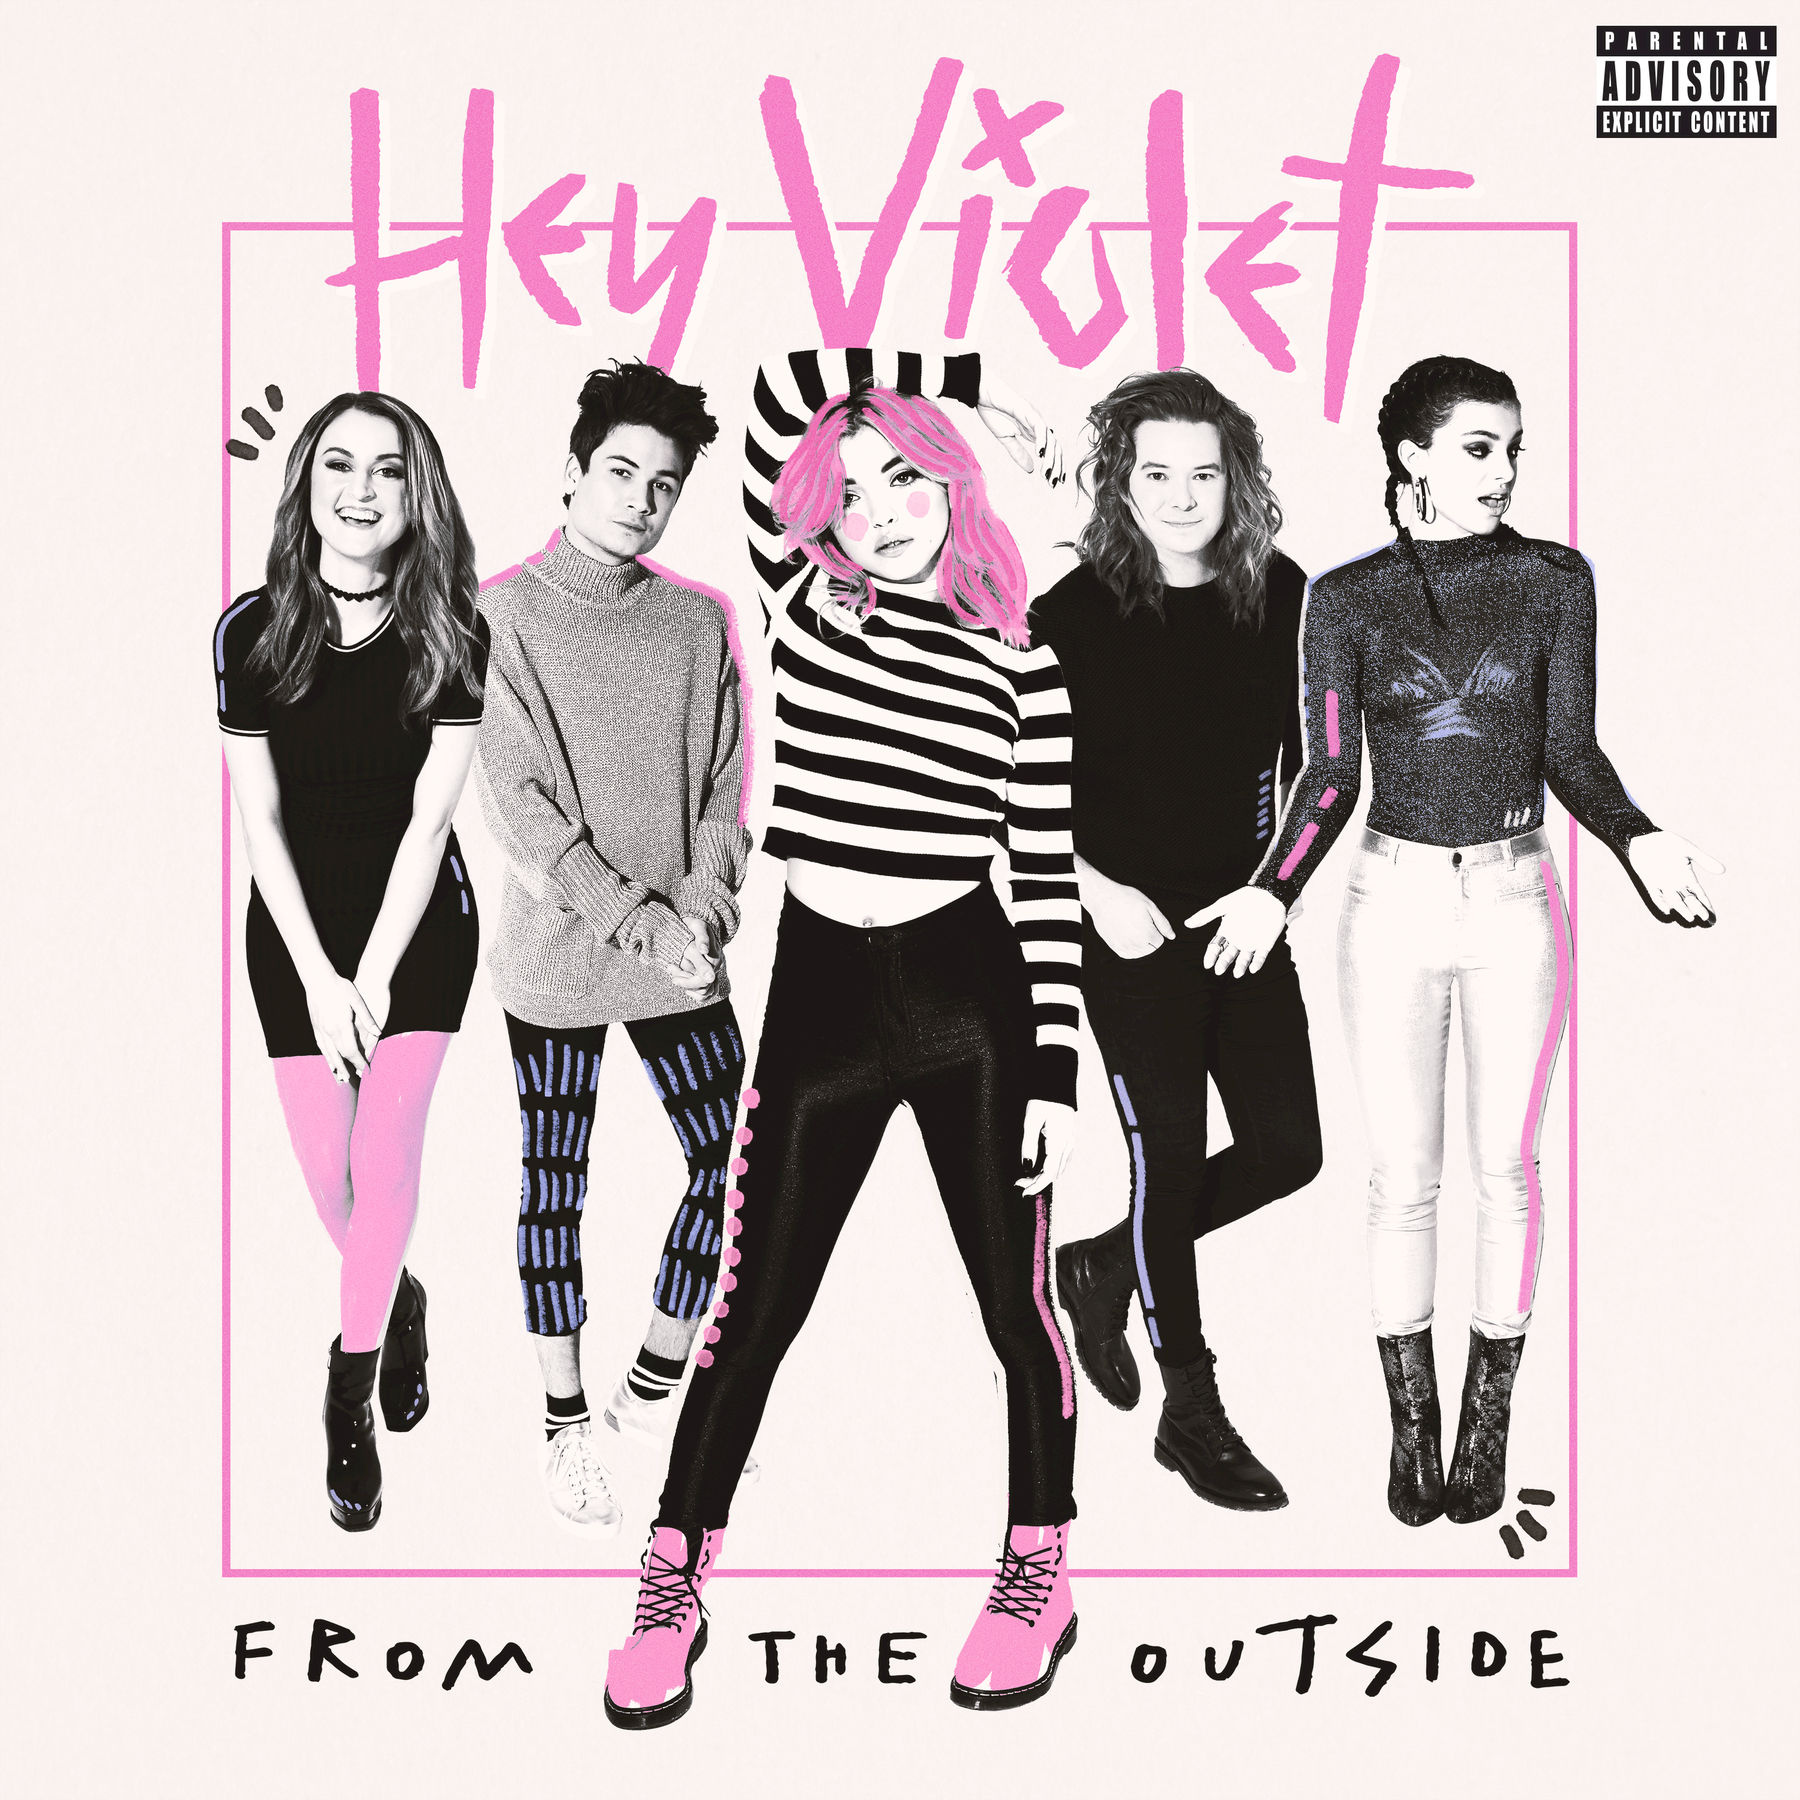 Album Review: Hey Violet the Outside